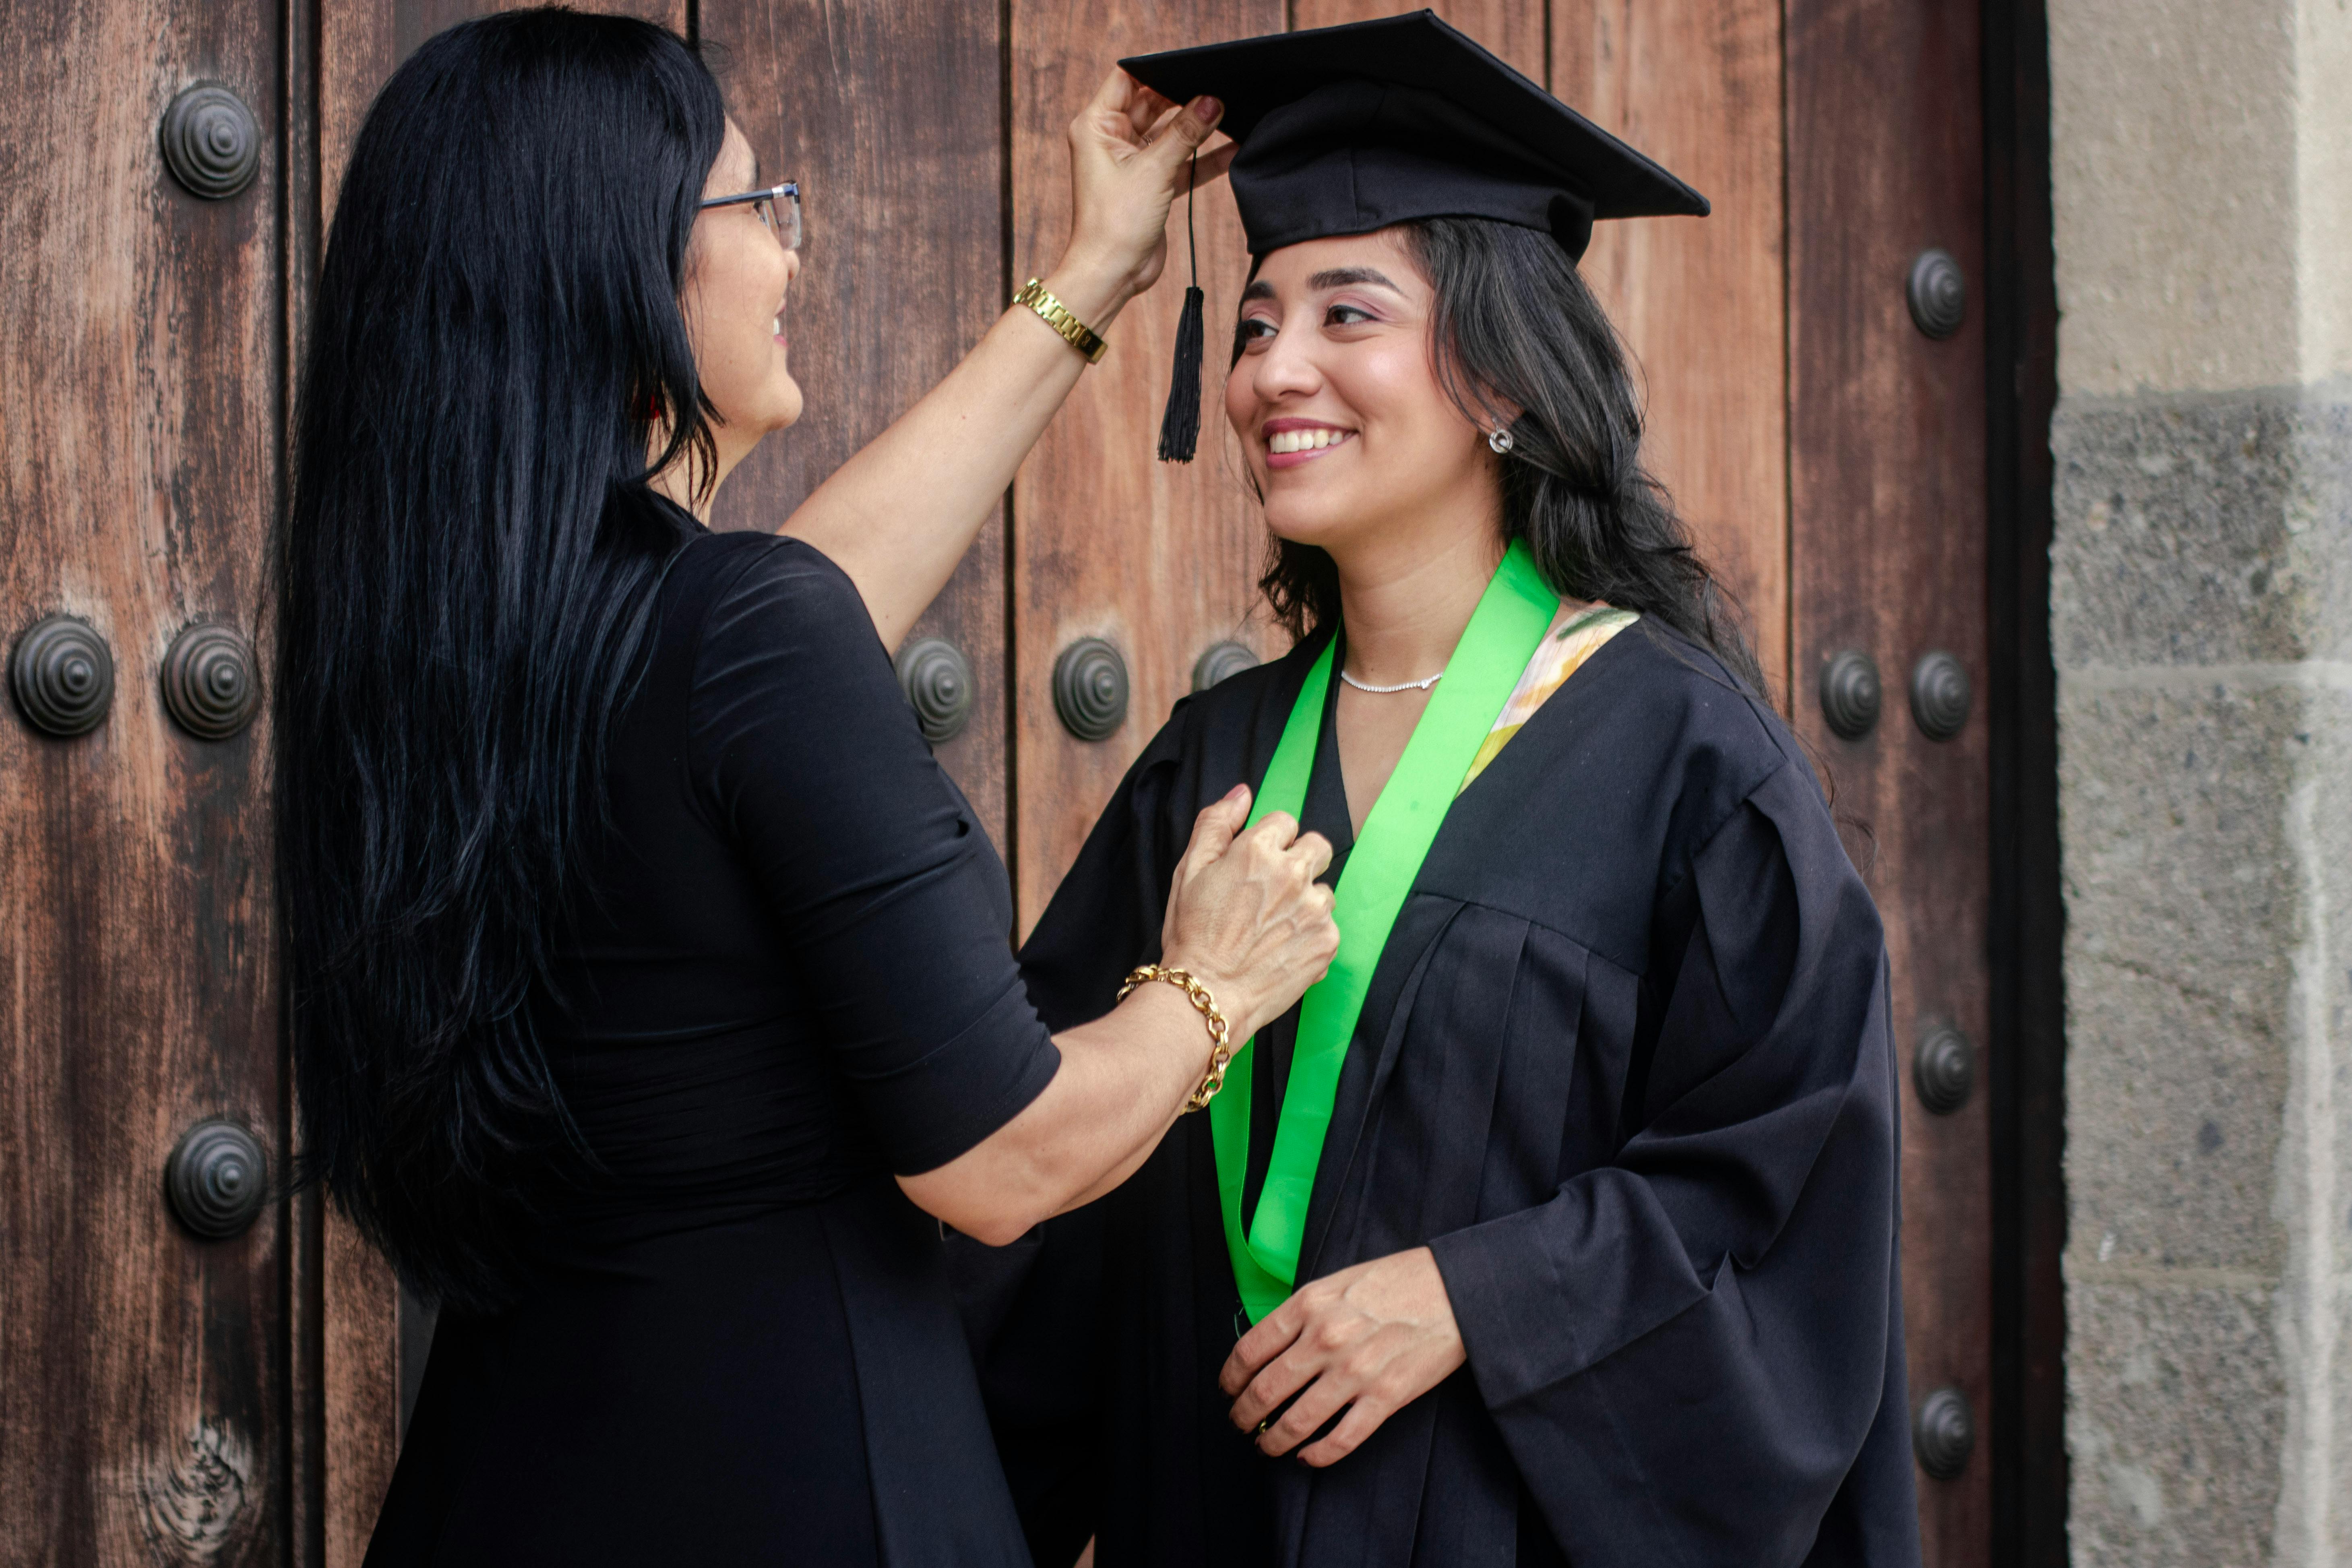 An older woman celebrating a young one's college graduation | Source: Pexels